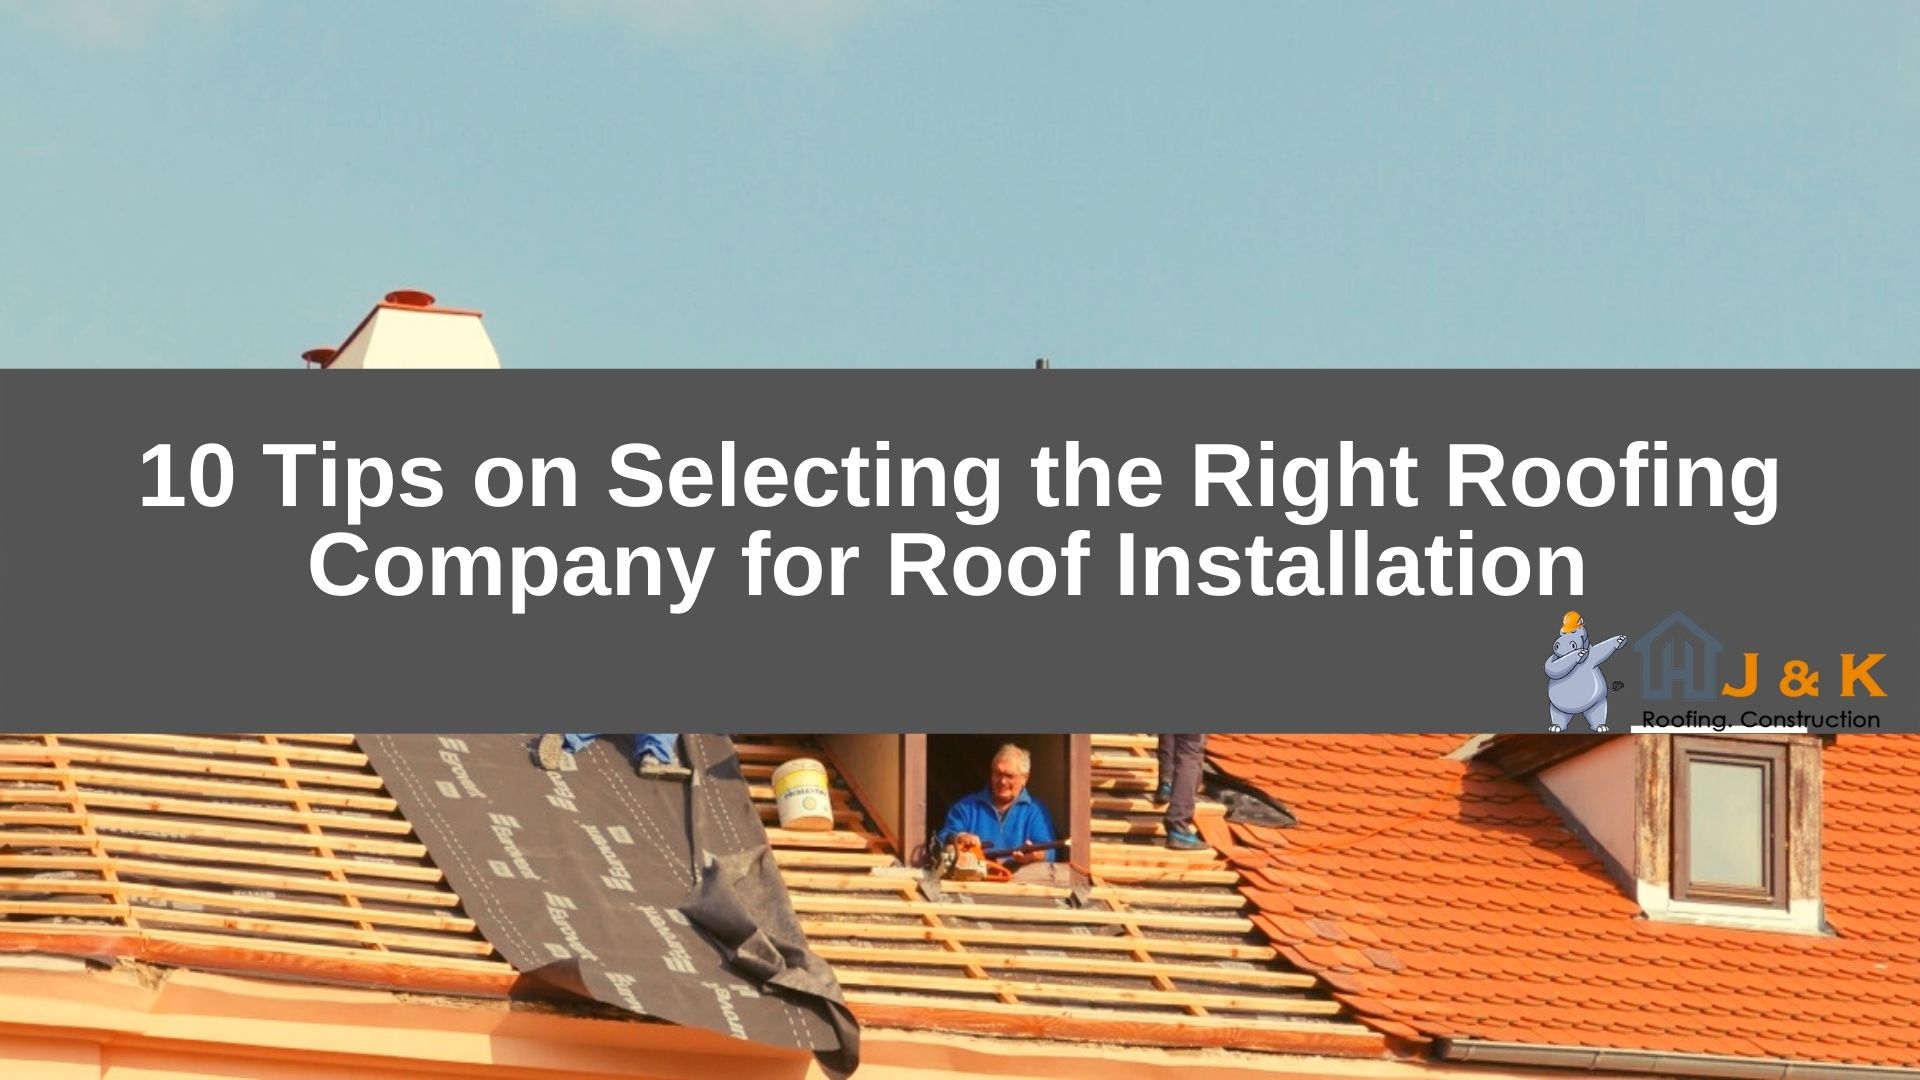 10 Tips on Selecting the Right Roofing Company for Roof Installation